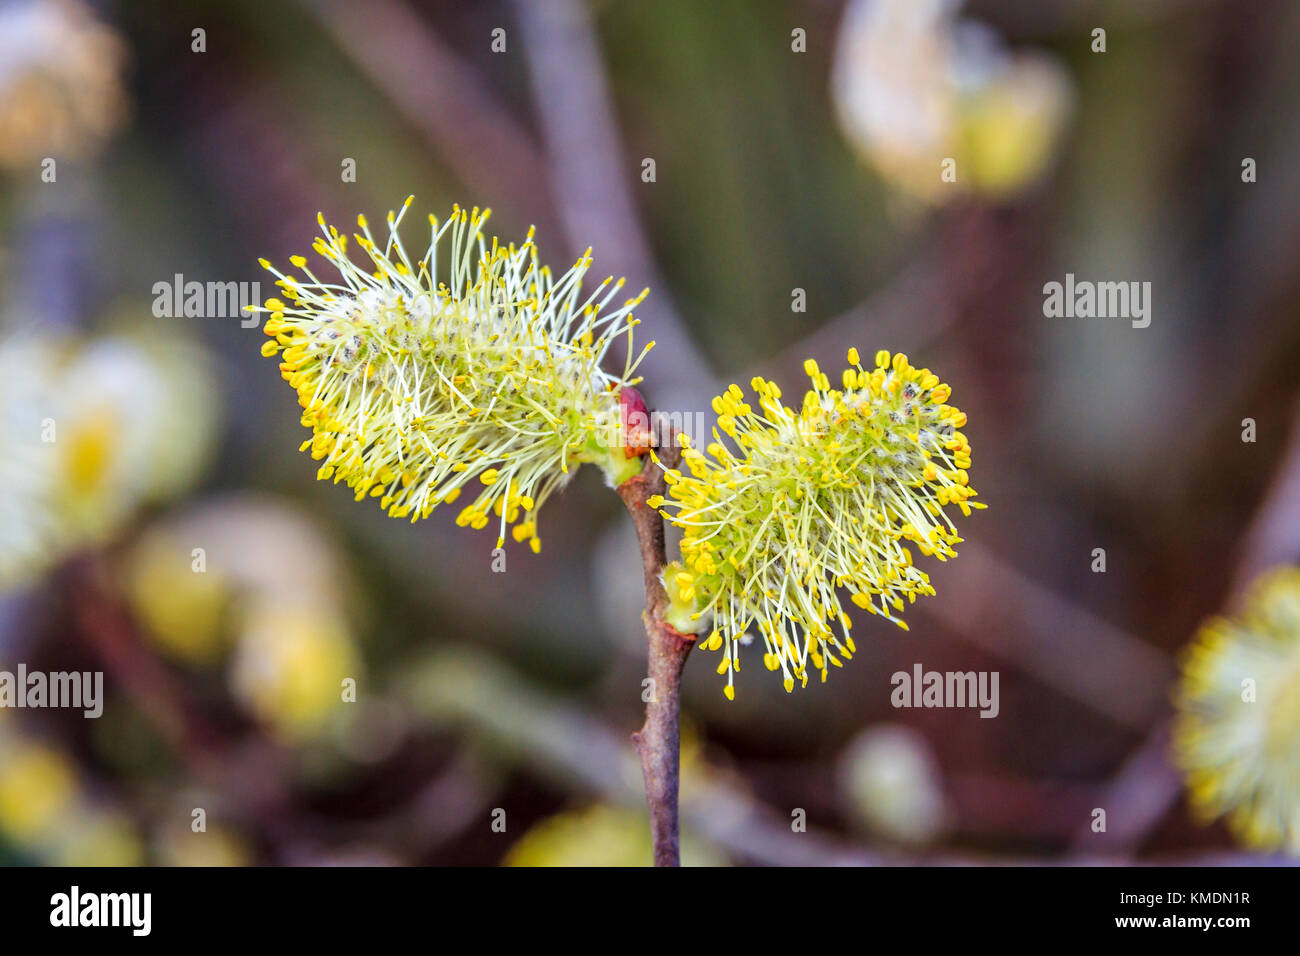 Close-up of yellow pollen on willow catkins Stock Photo